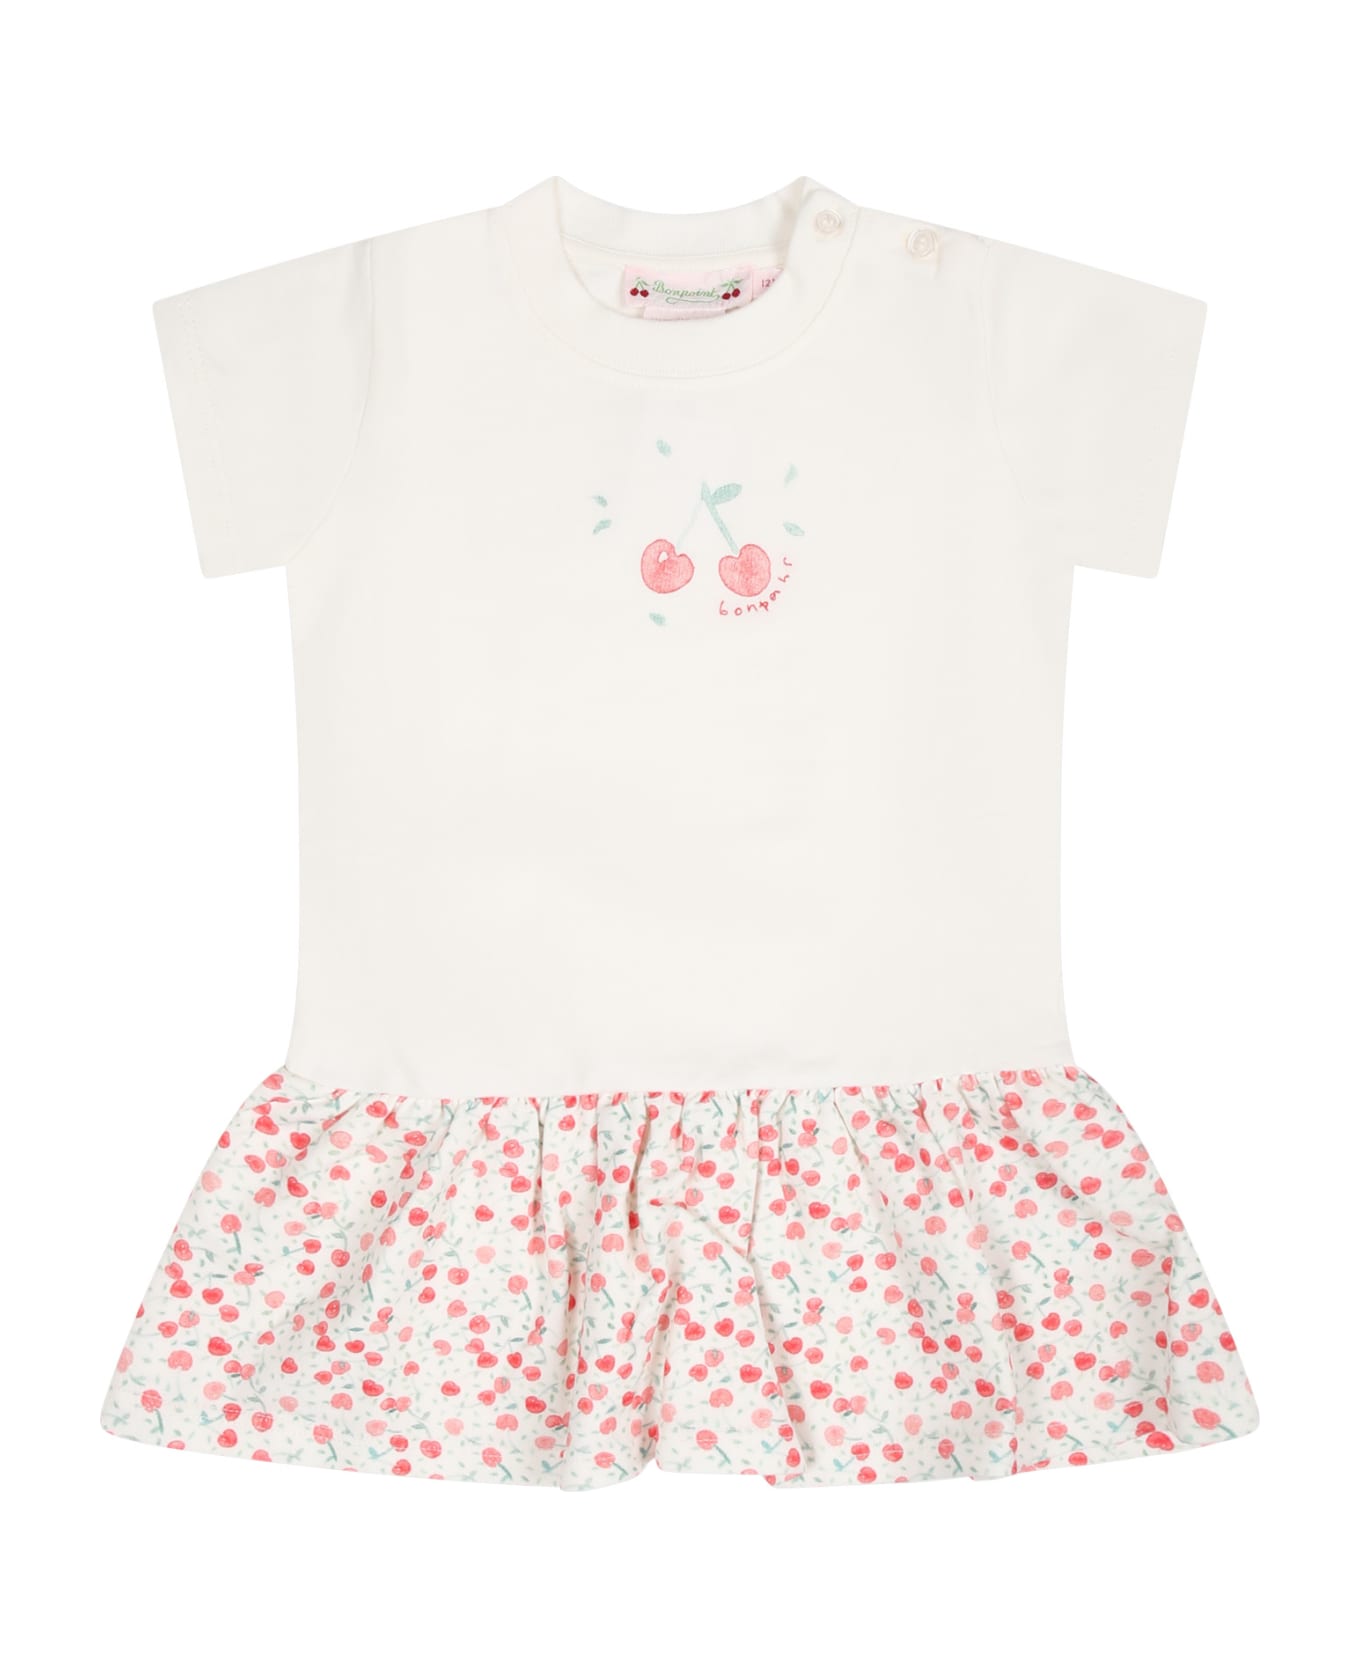 Bonpoint White Casual Dress For Girl With Cherries - White